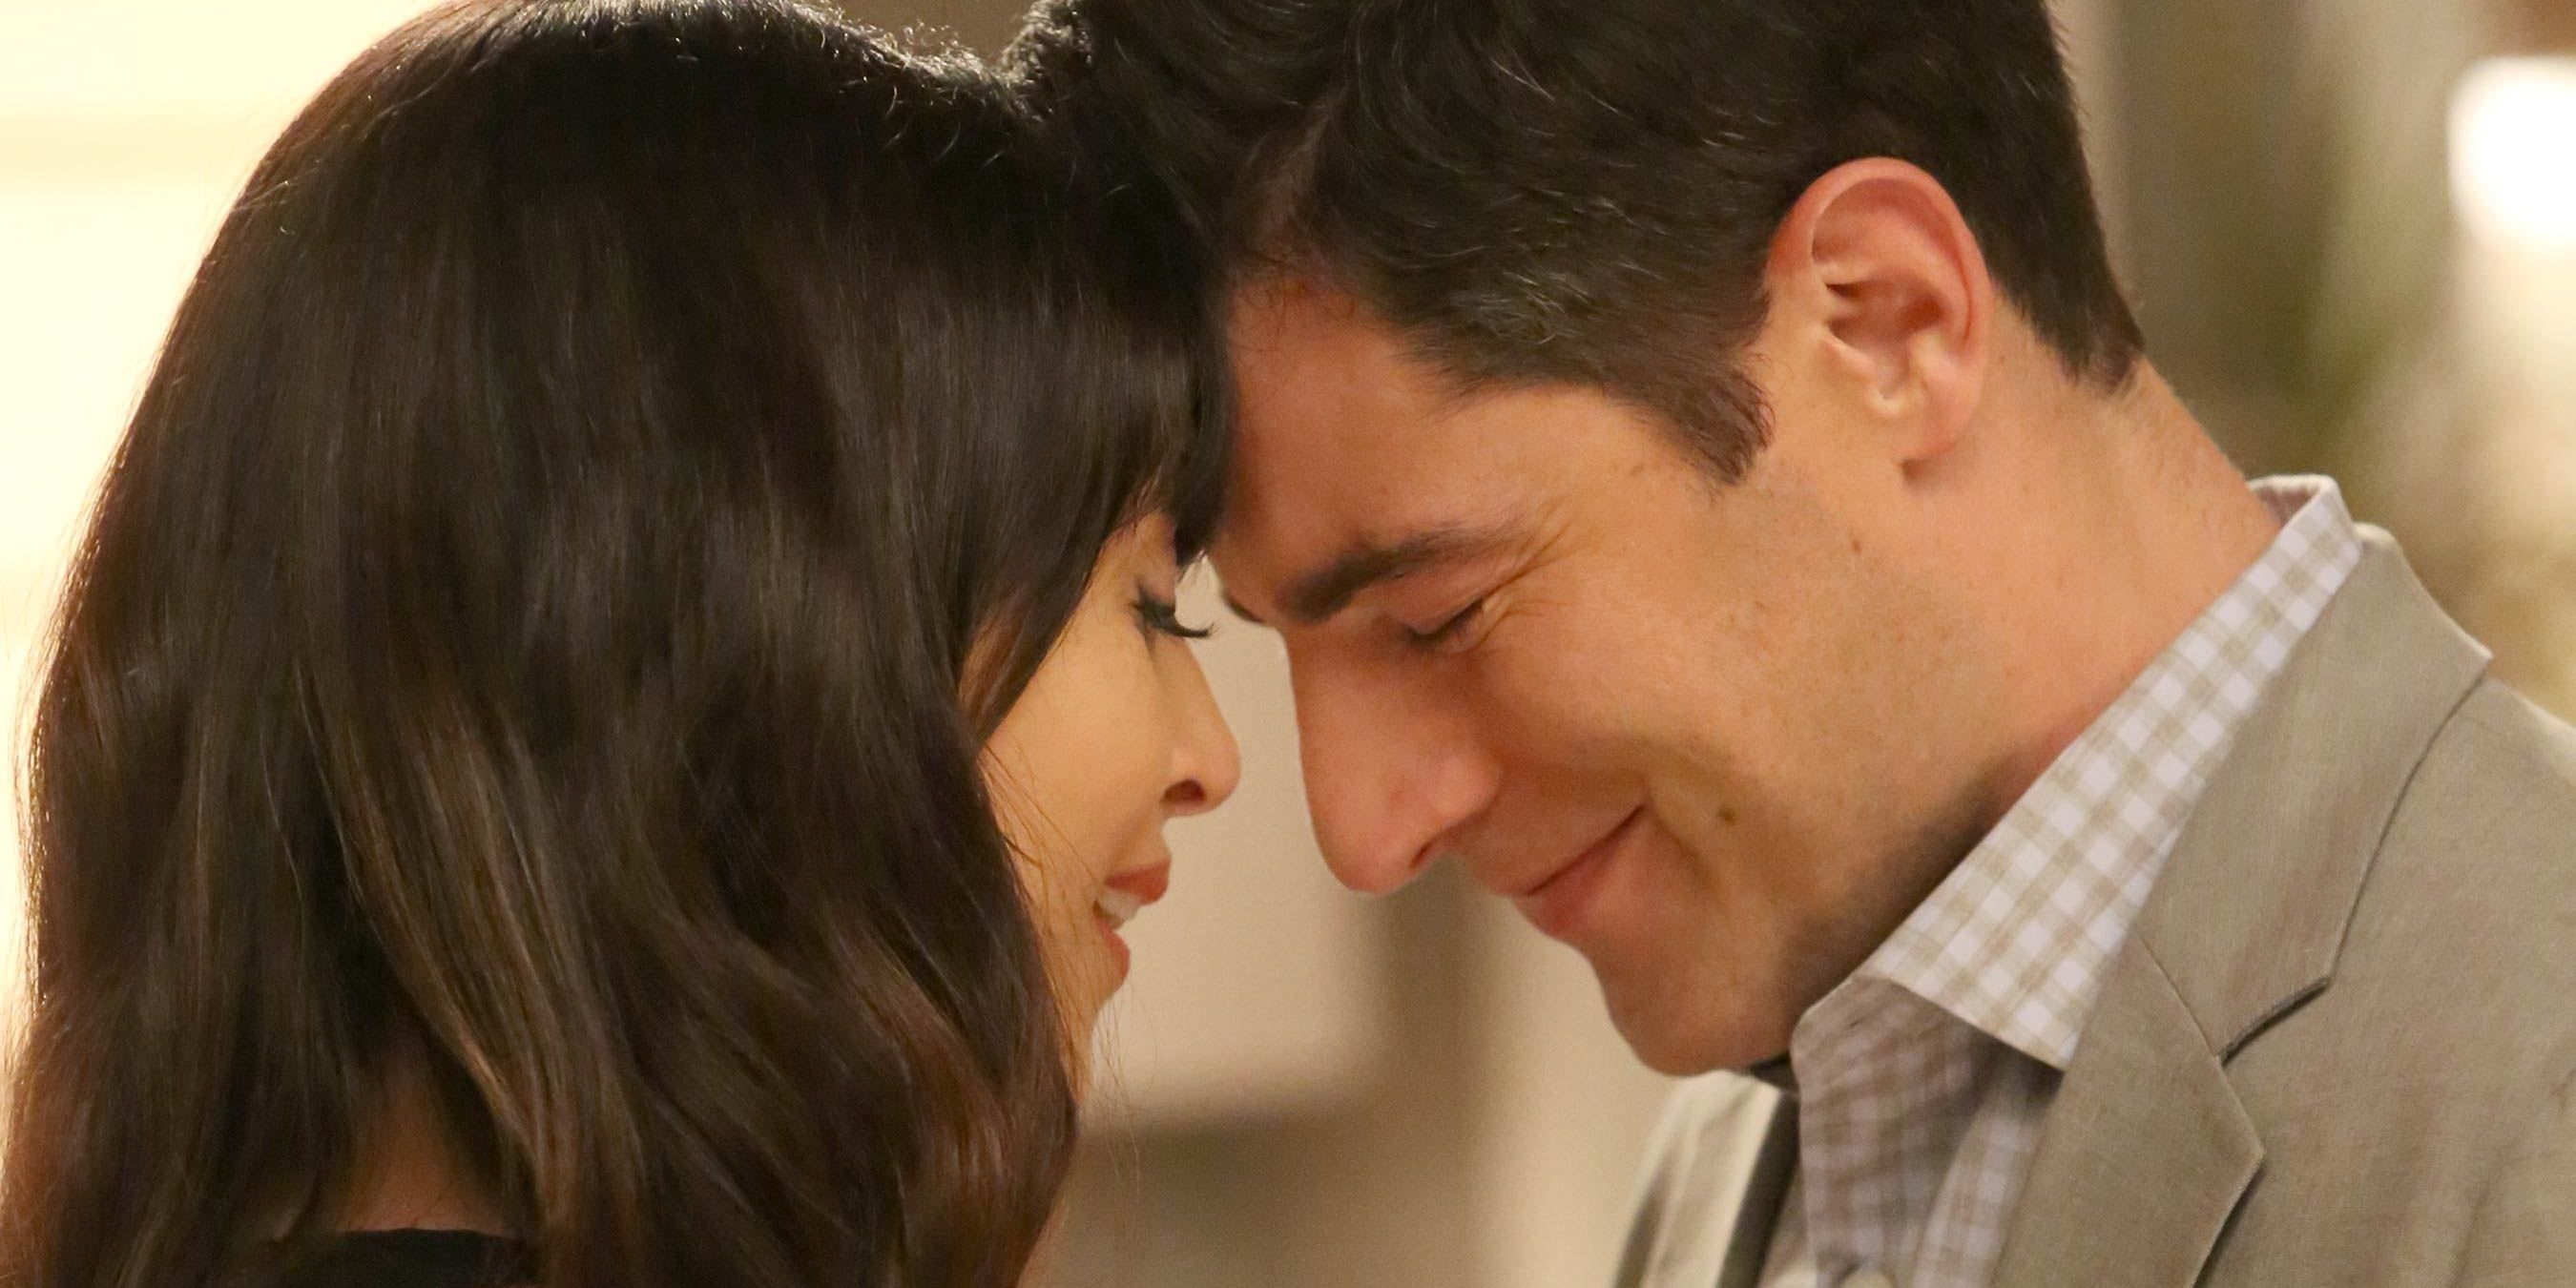 New Girl 5 Couples That Are Perfect Together (& 5 That Make No Sense)